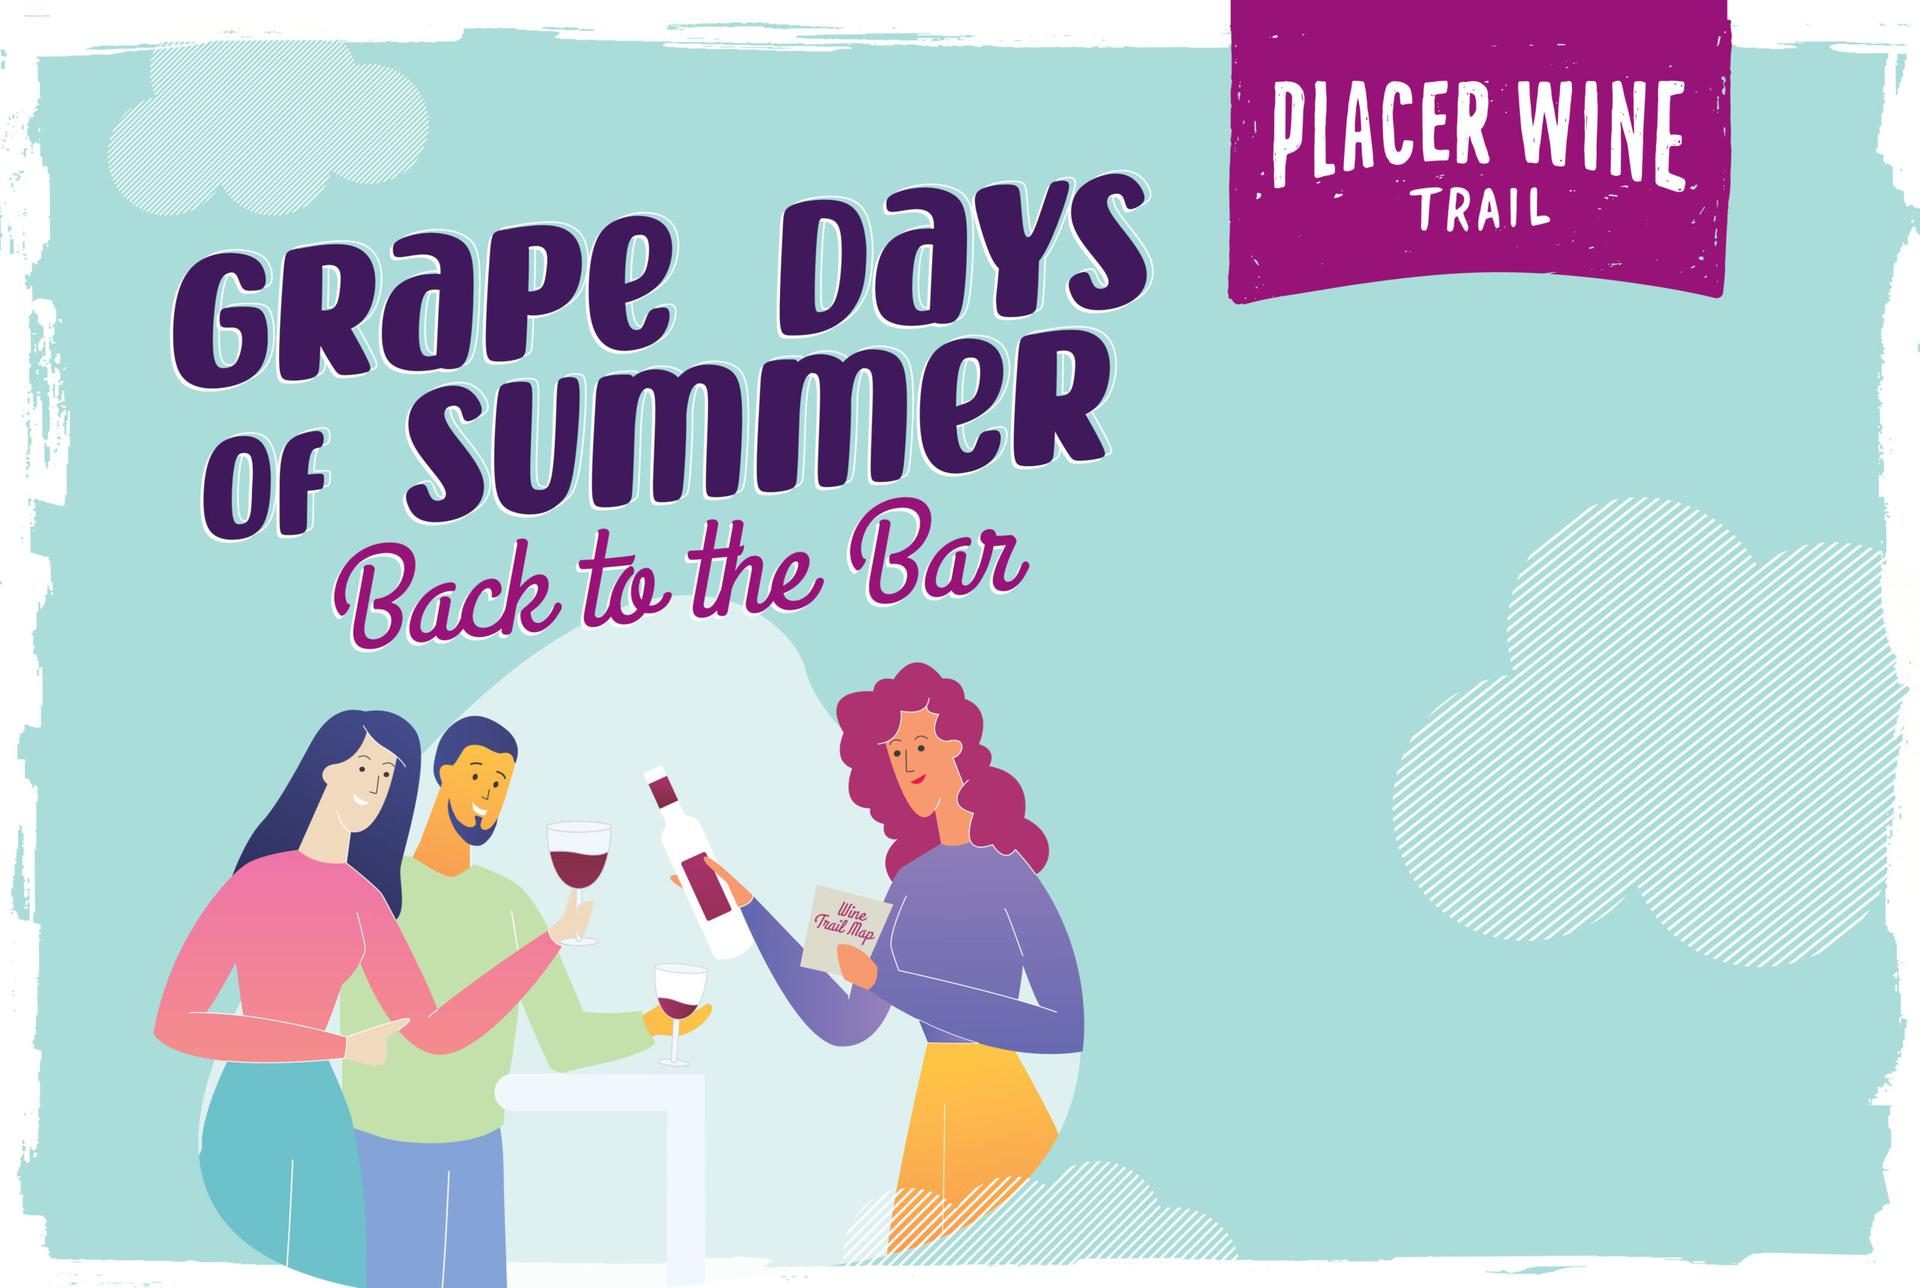 Placer Wine Trail Grape Days of Summer